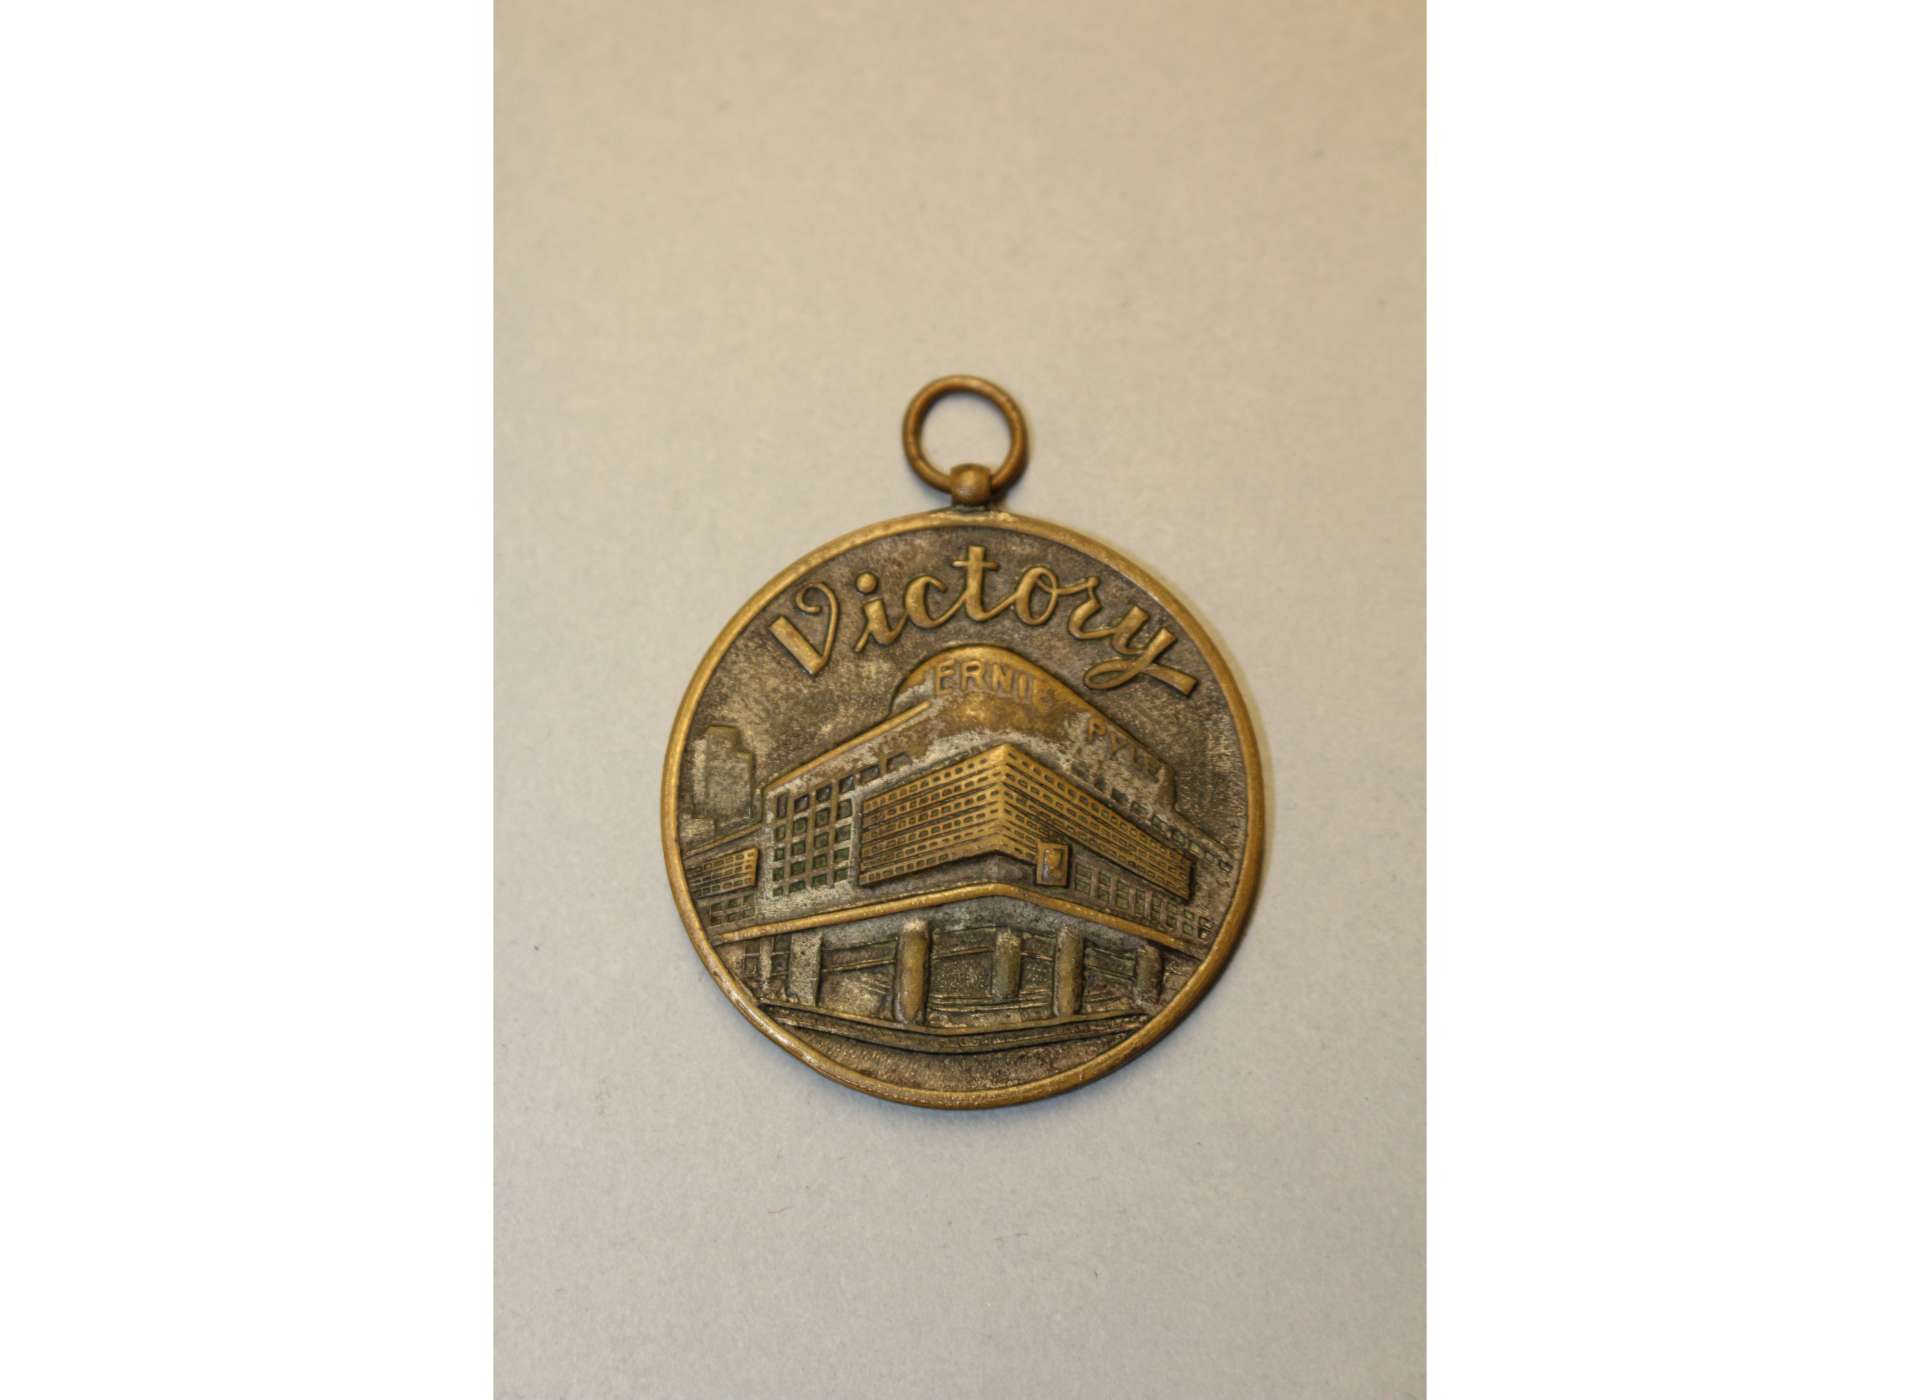 The obverse of a 1947 postwar souvenir medal featuring the Ernie Pyle theater. The National WWII Museum, Gift in memory of Fr. John Francis McMahon, 2008.457.021.